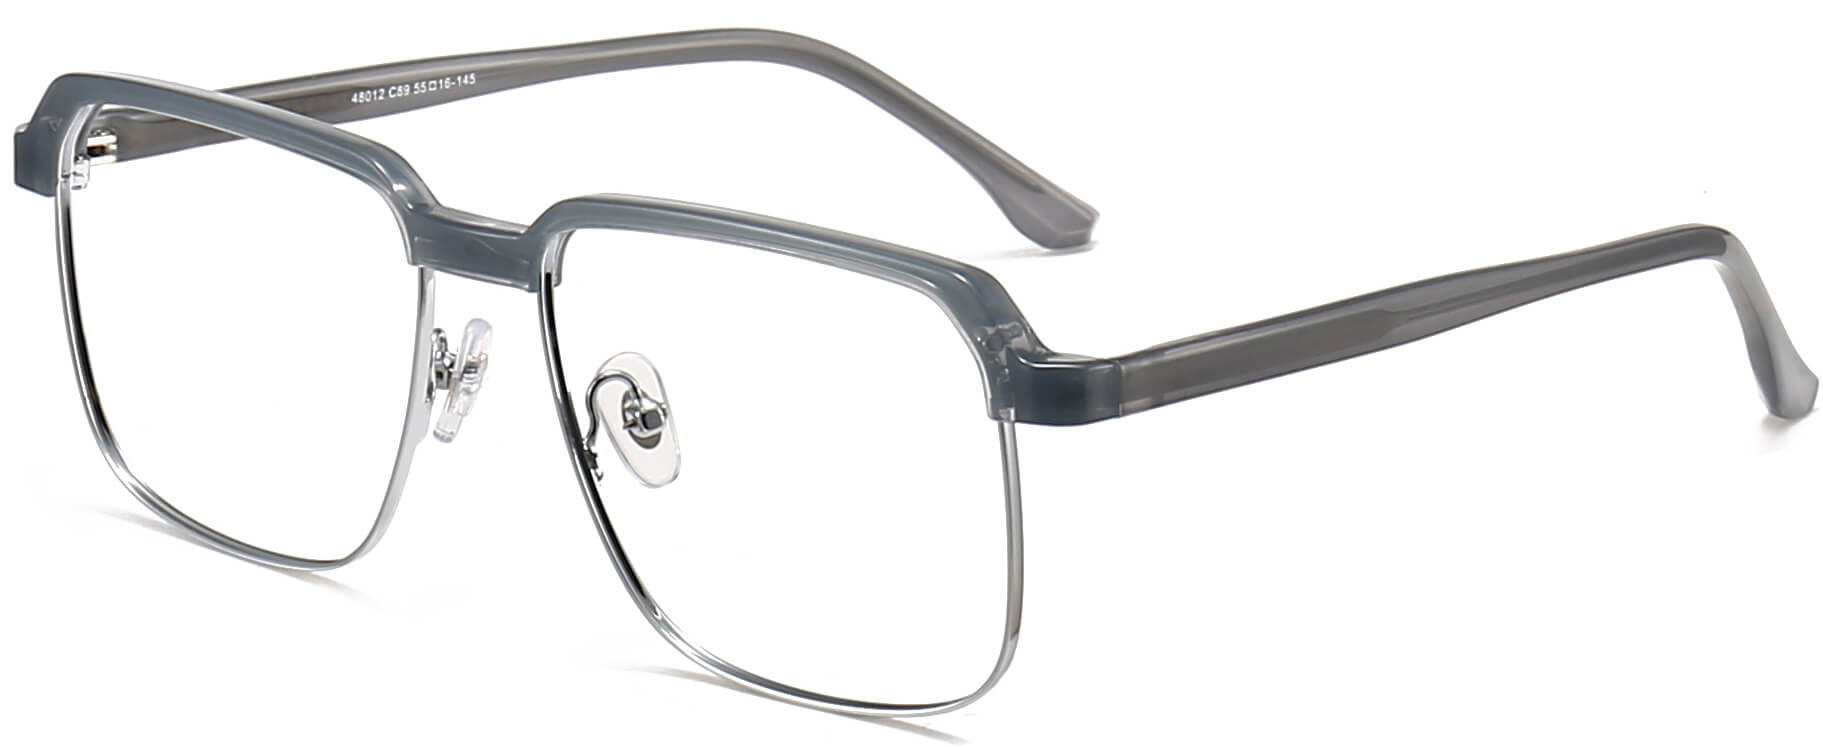 Zeke Square Gray Eyeglasses from ANRRI, angle view